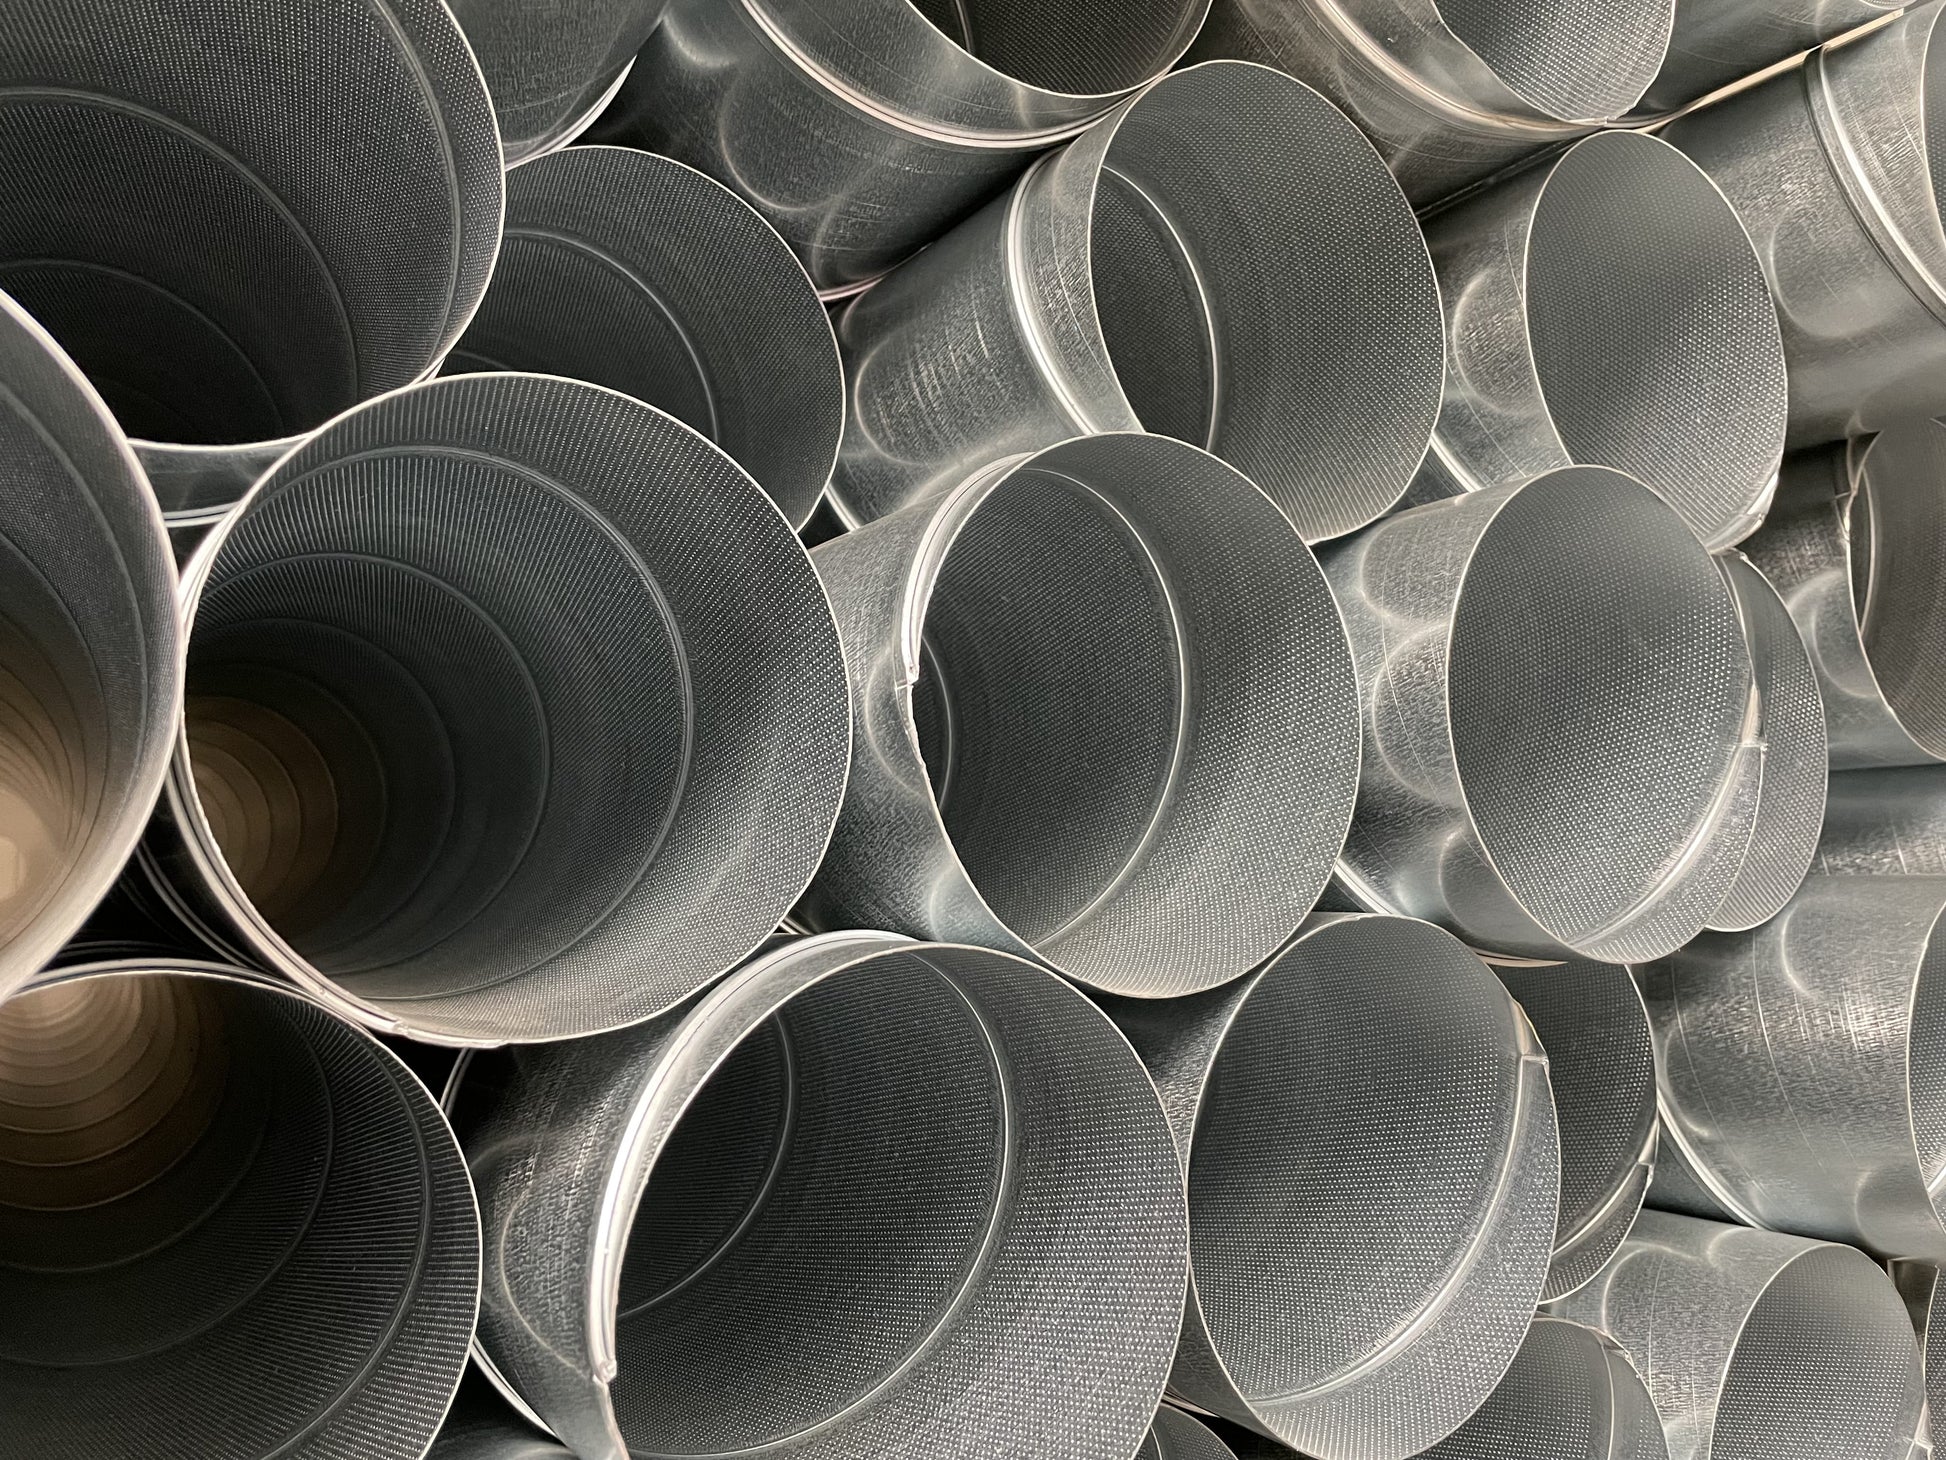 Galvanised Steel Spiral Duct for ventilation systems that conforms to DW144.